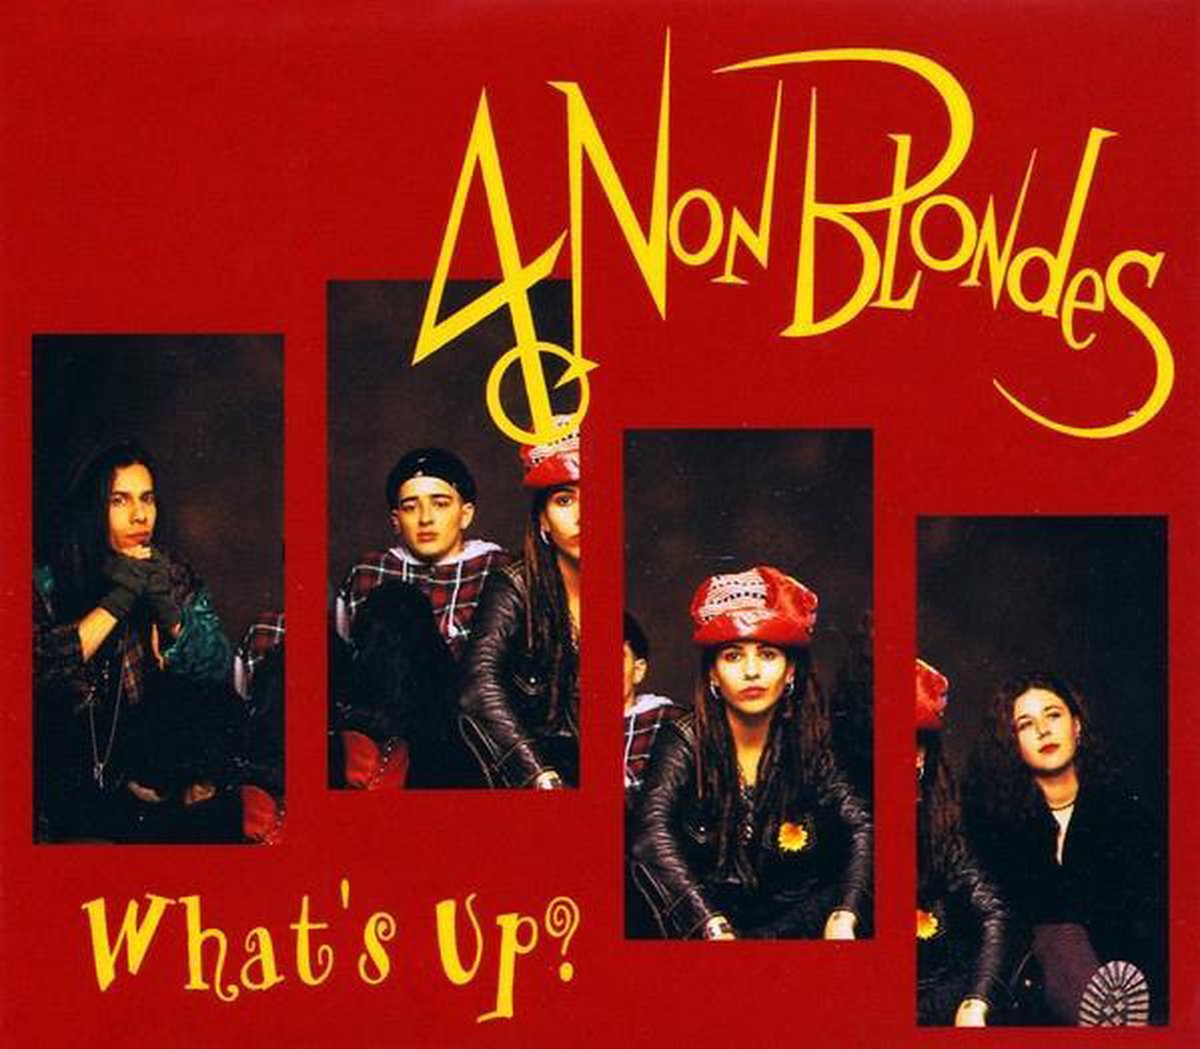 Whats Up?, 4 Non Blondes | Musique | bol